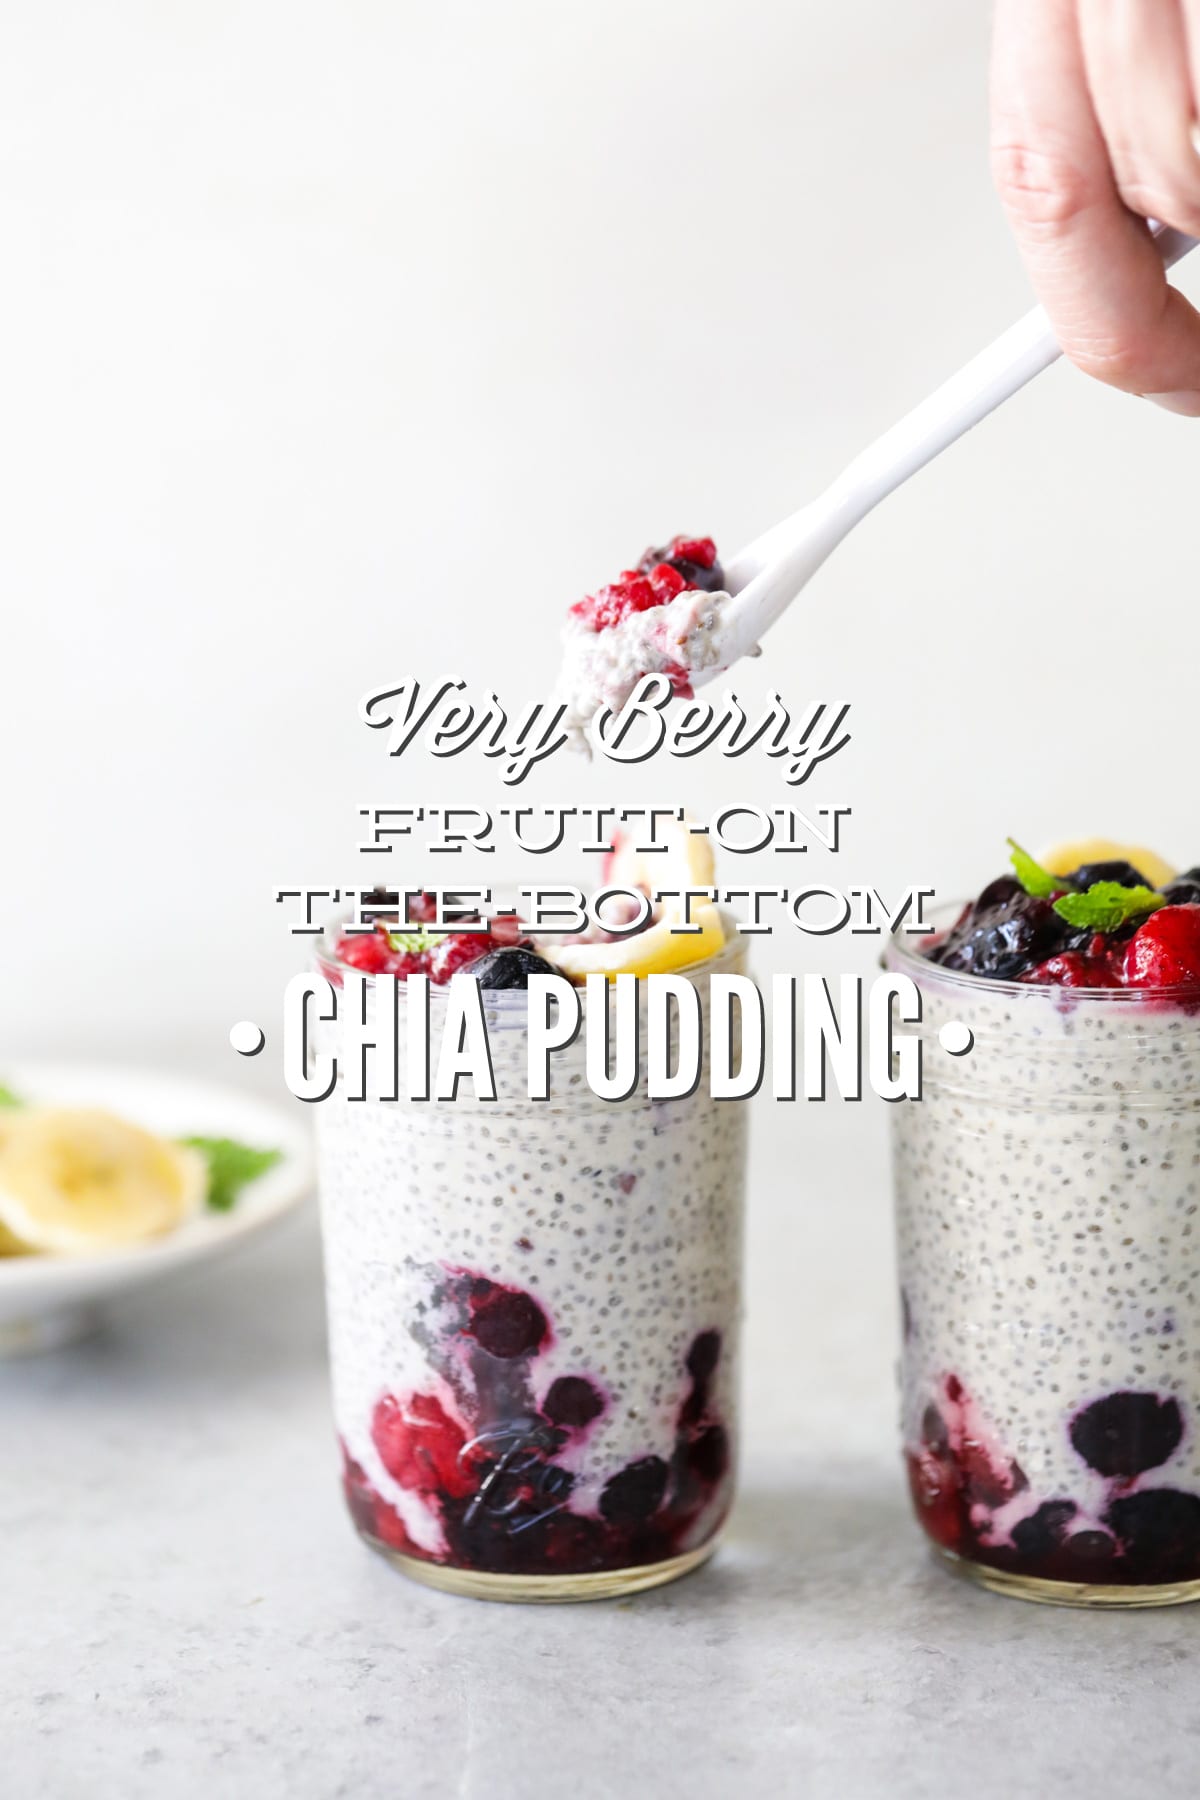 Very Berry Fruit-on-the-Bottom Chia Pudding